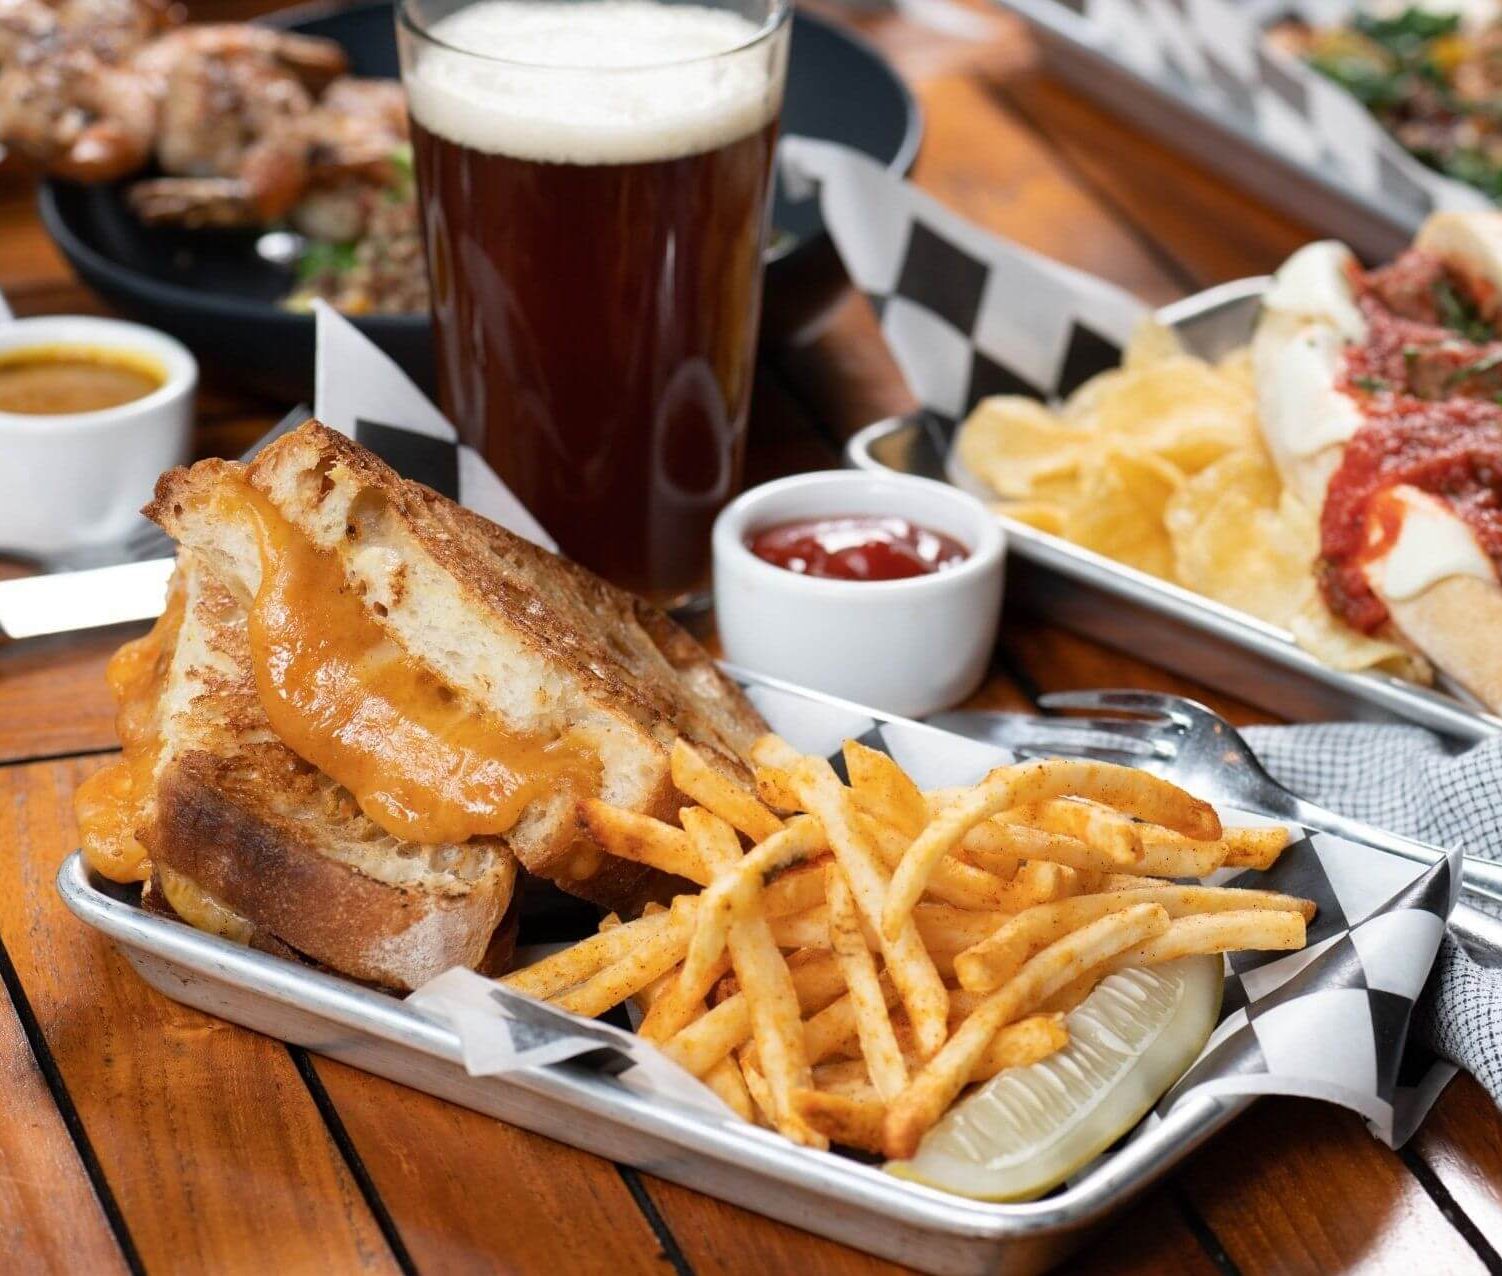 Grilled cheese with fries and a meatball sub next to a cold beer